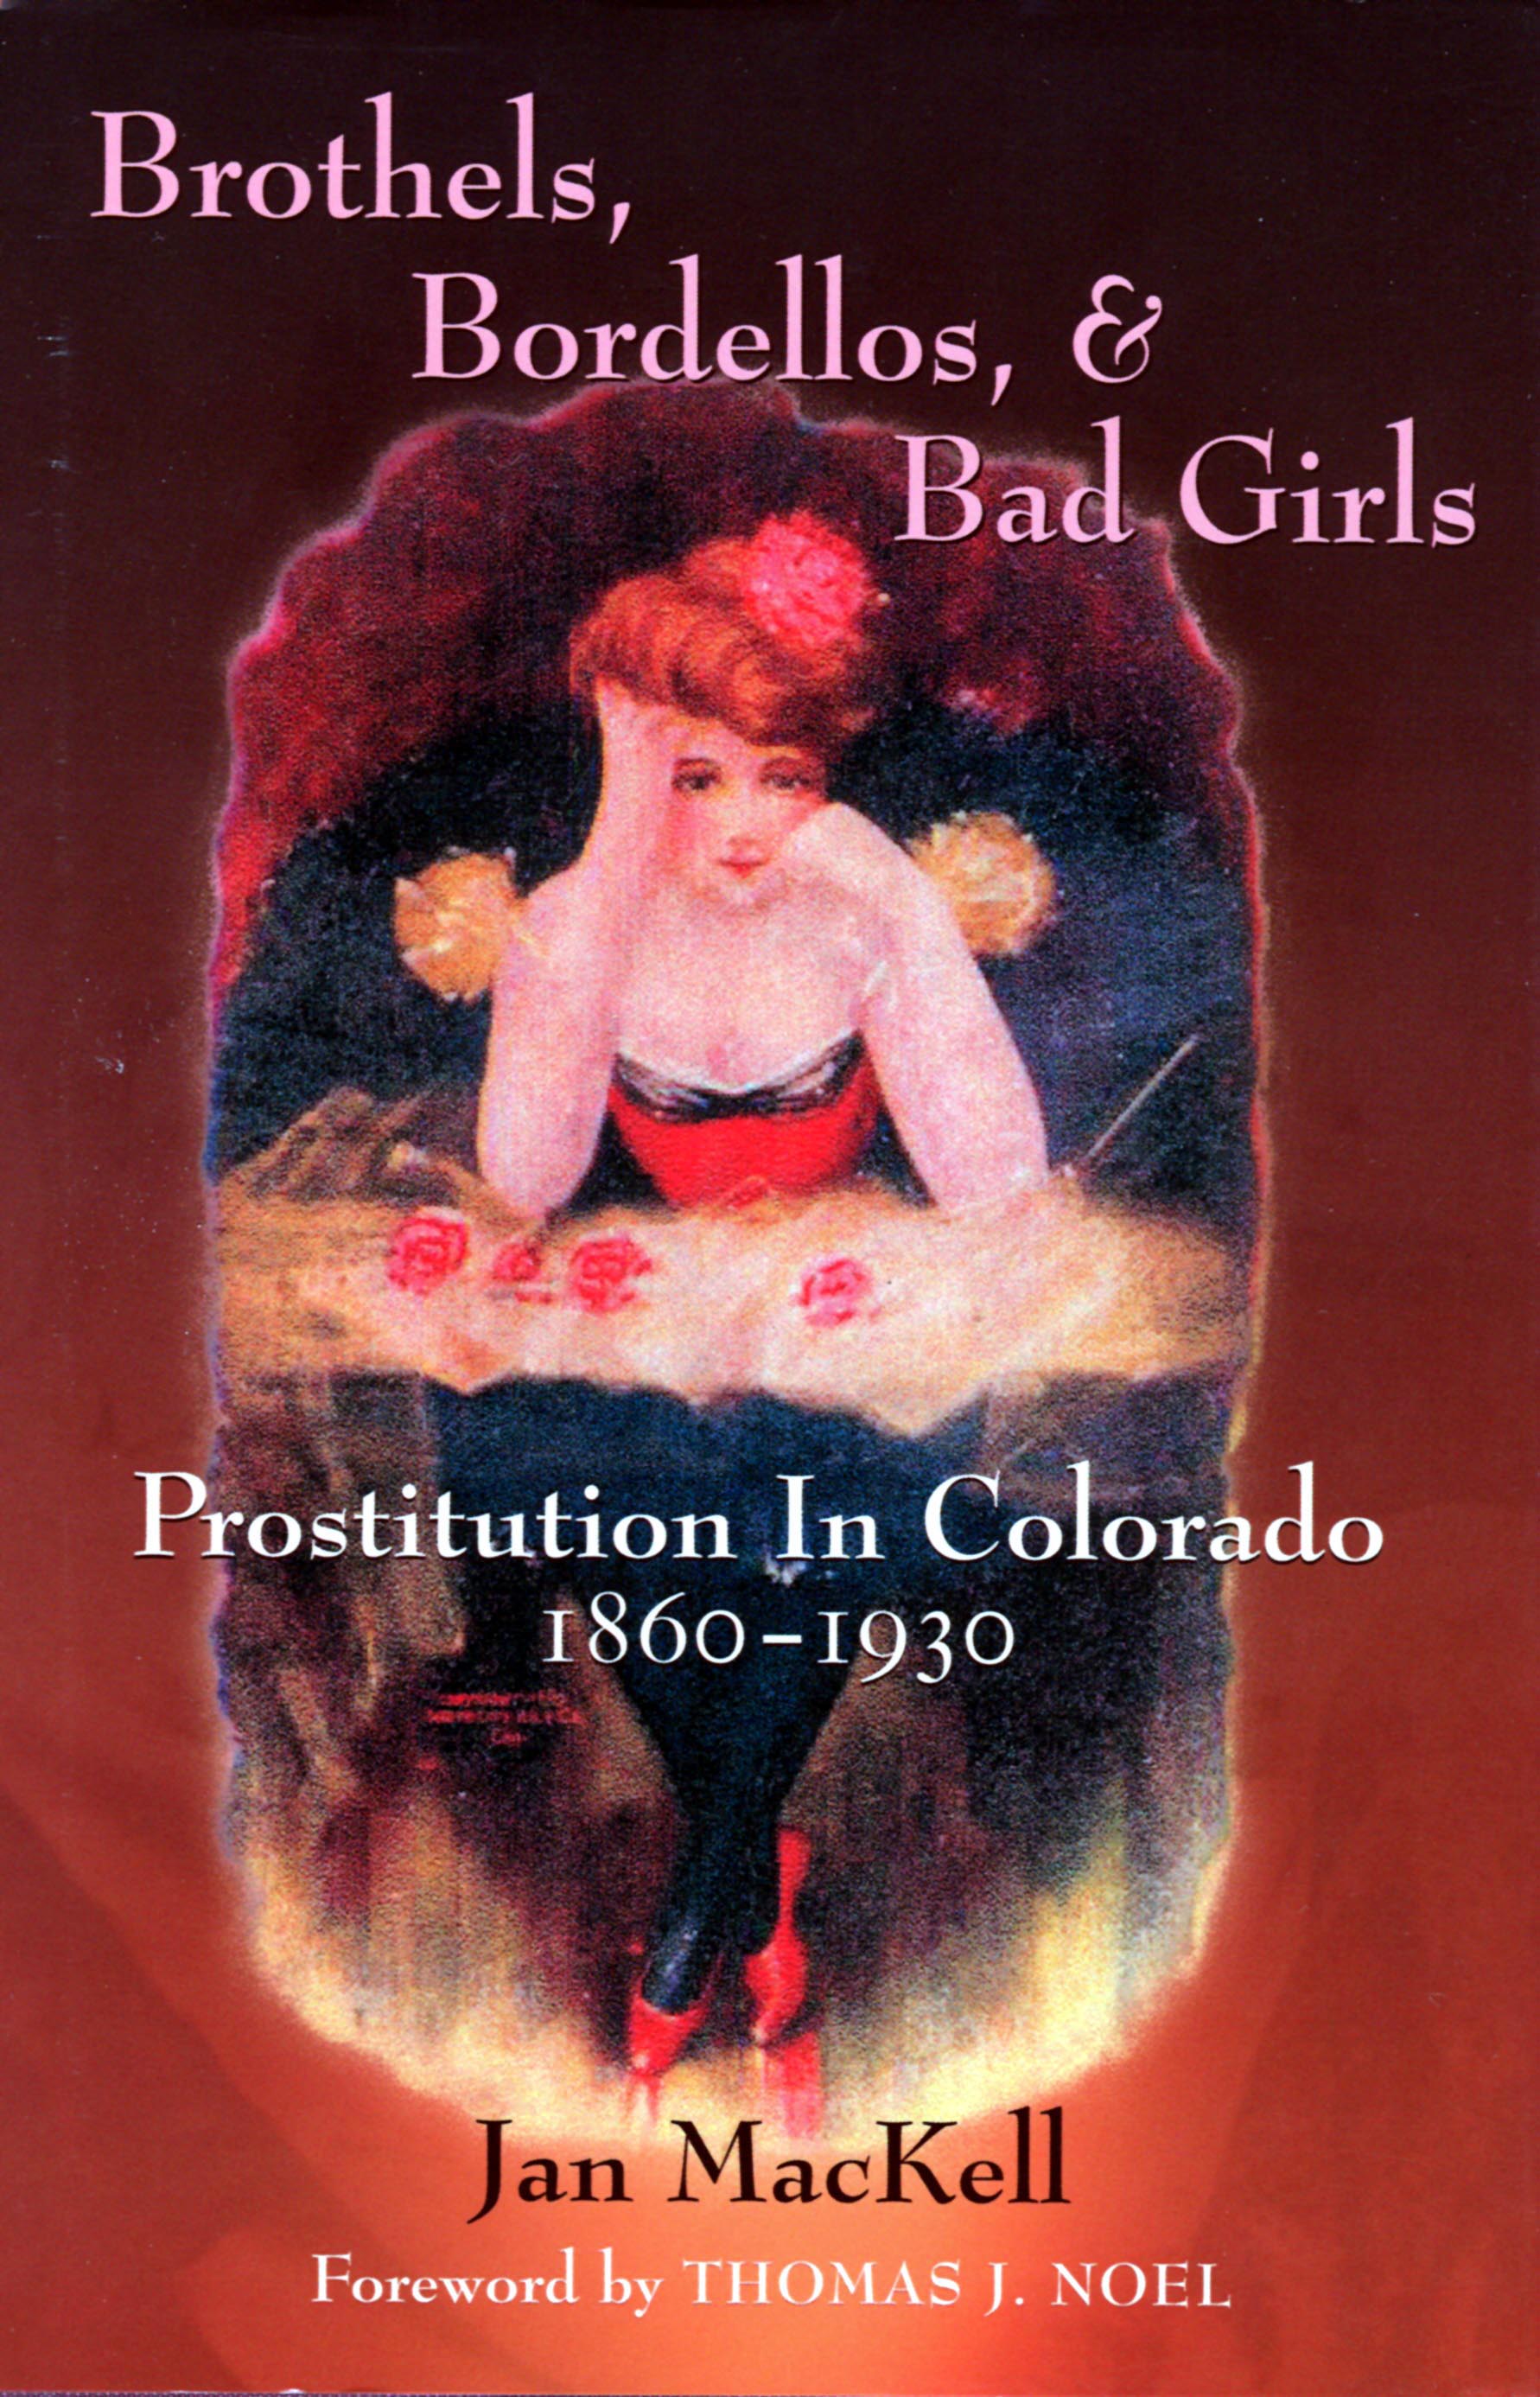 Brothels, Bordellos and Bad Girls Prostitution in Colorado 1860-1930, Chapter Two Life as a Harlot Jan MacKell Collins